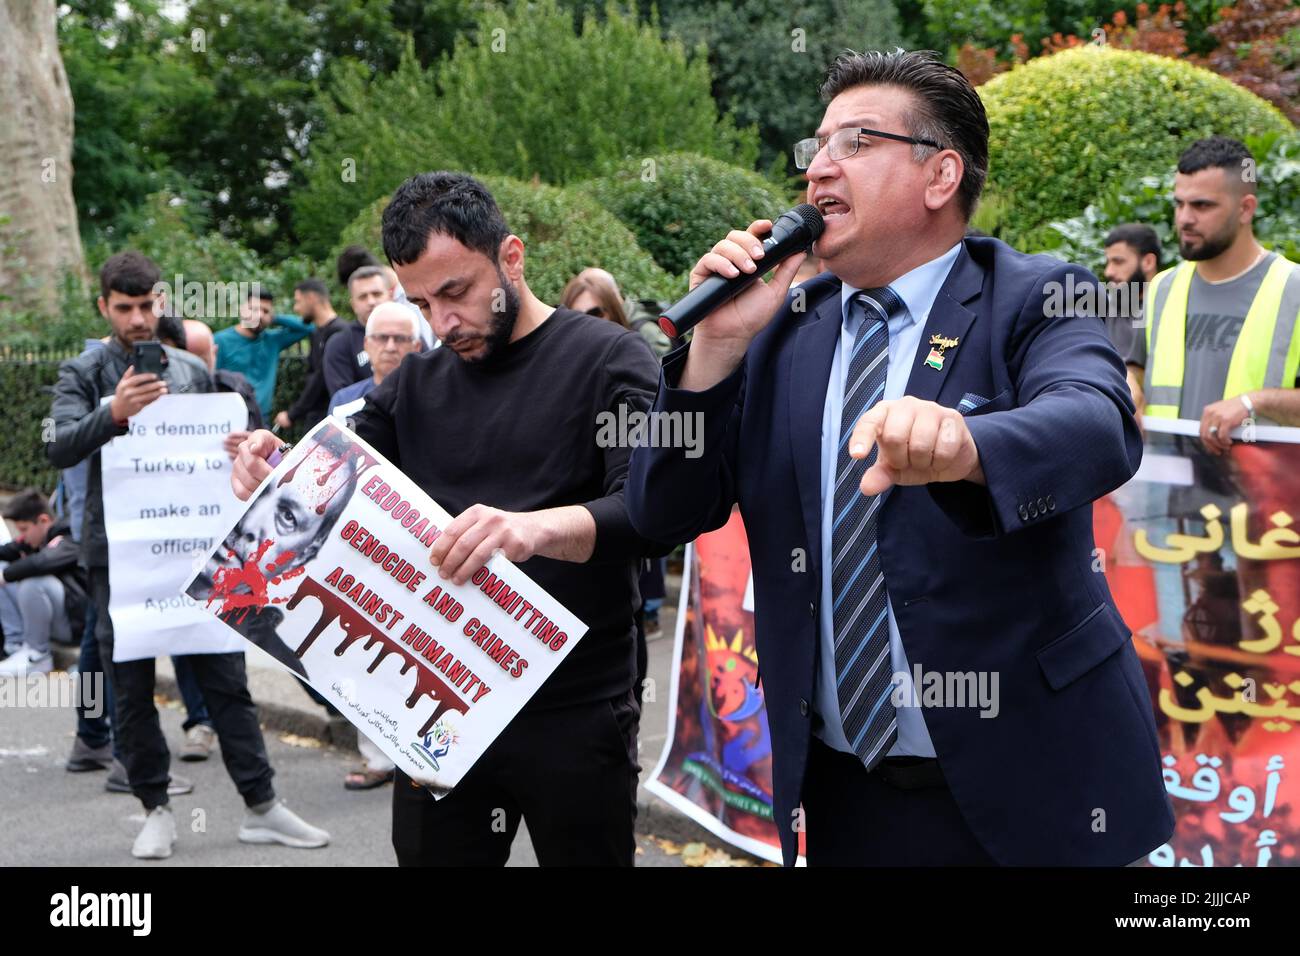 London, UK, 26th July, 2022. Members of the Kurdish community protest opposite the Turkish Embassy following artillery fire which killed nine civilians, including a baby, in a tourist area near the city of Zakho. Turkey denies involvement, blaming the Kurdistan Workers' Party (PKK) for the incident, though it is believe the group do no have any artillery based there. Credit: Eleventh Hour Photography/Alamy Live News Stock Photo